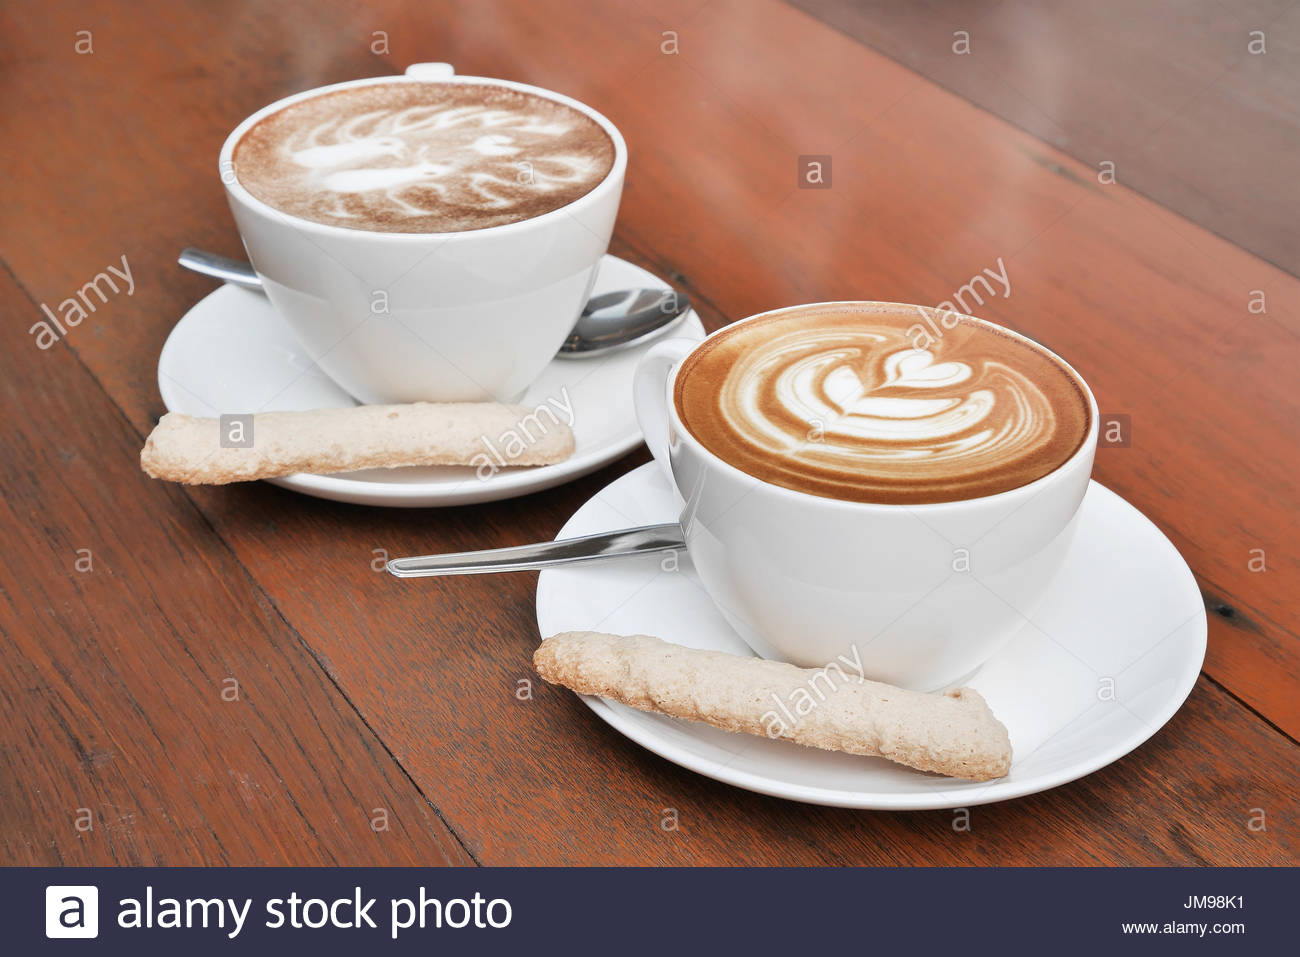 two-cups-of-latte-art-coffee-in-a-white-cup-on-wooden-background-JM98K1.jpg